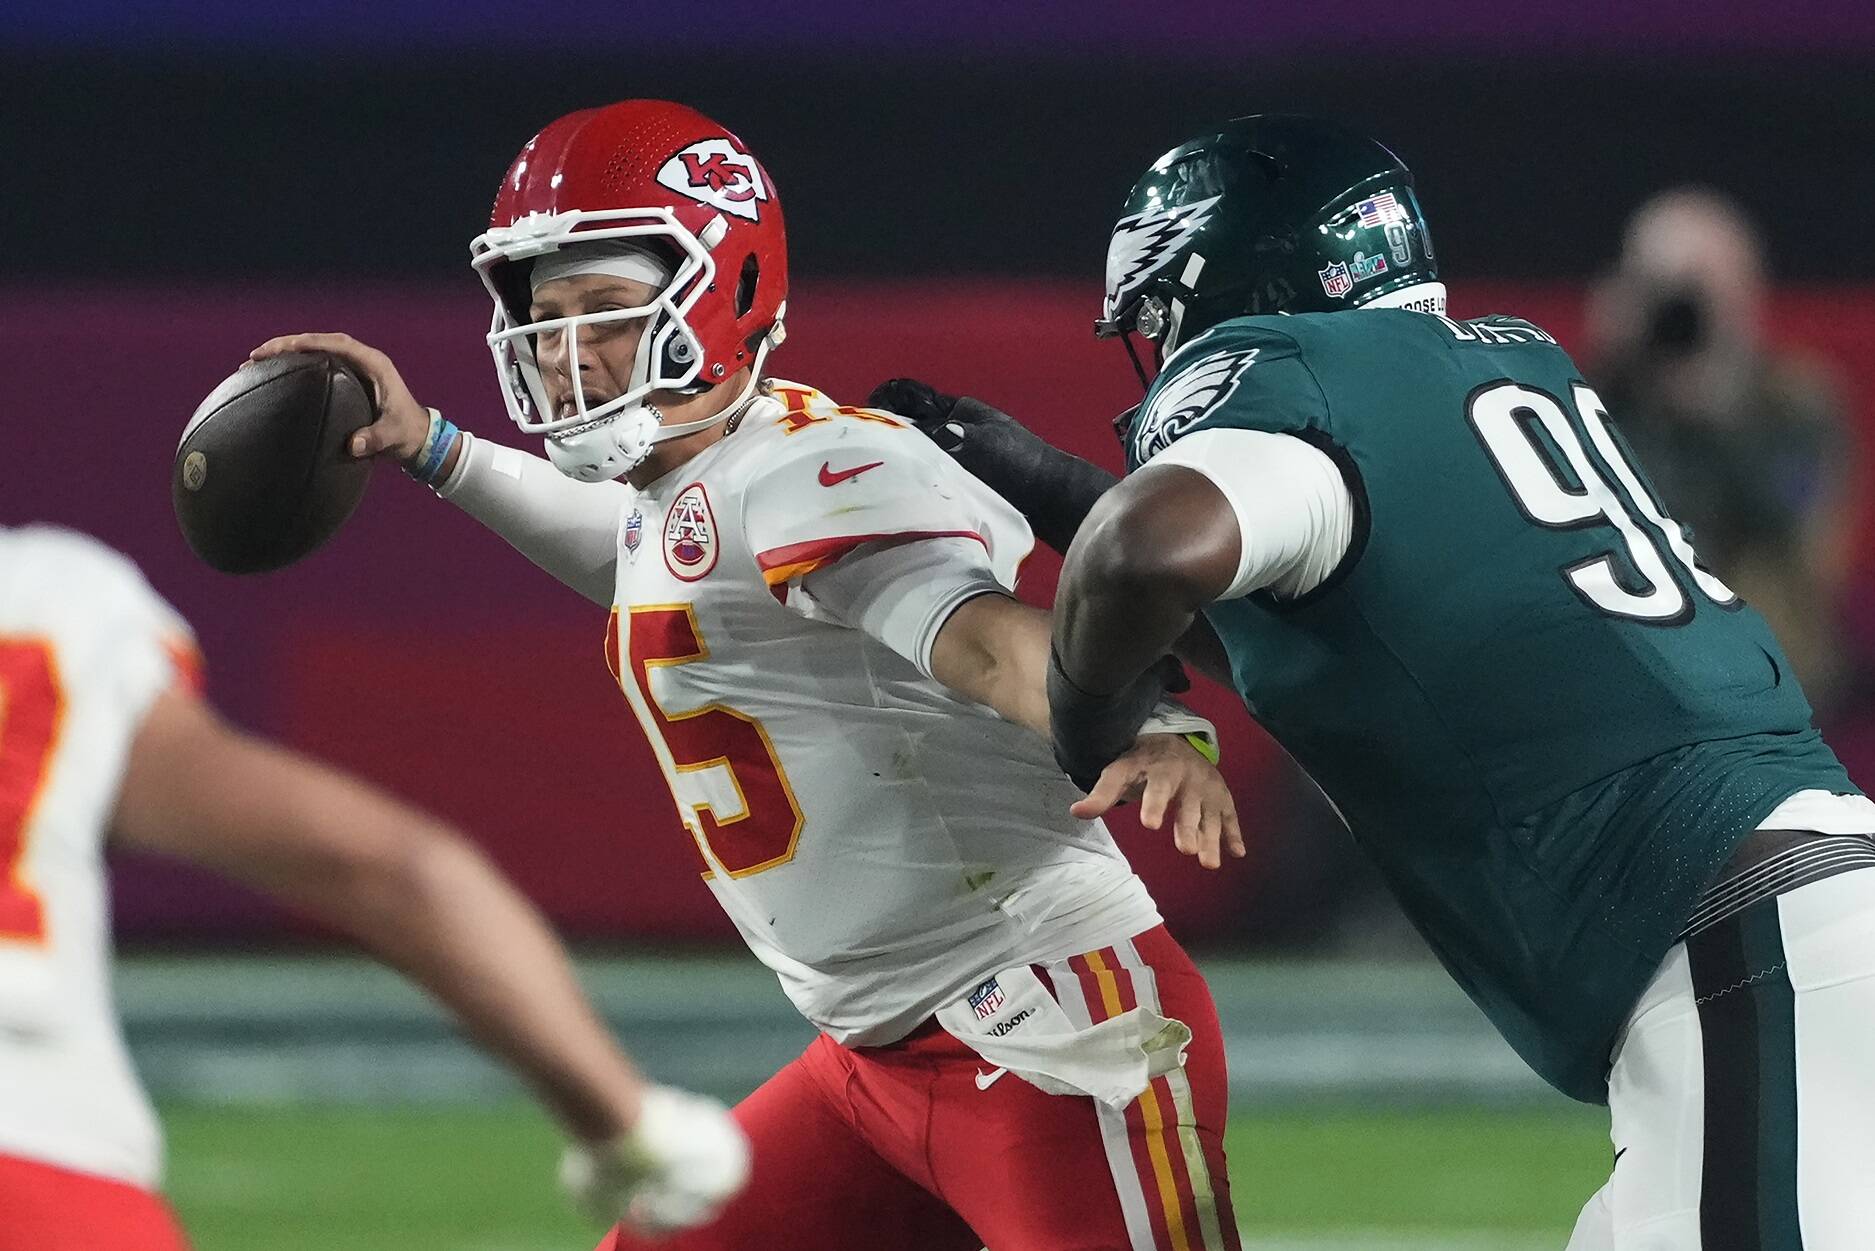 Super Bowl 2023 matchup set: Eagles, Chiefs to vie for Lombardi Trophy